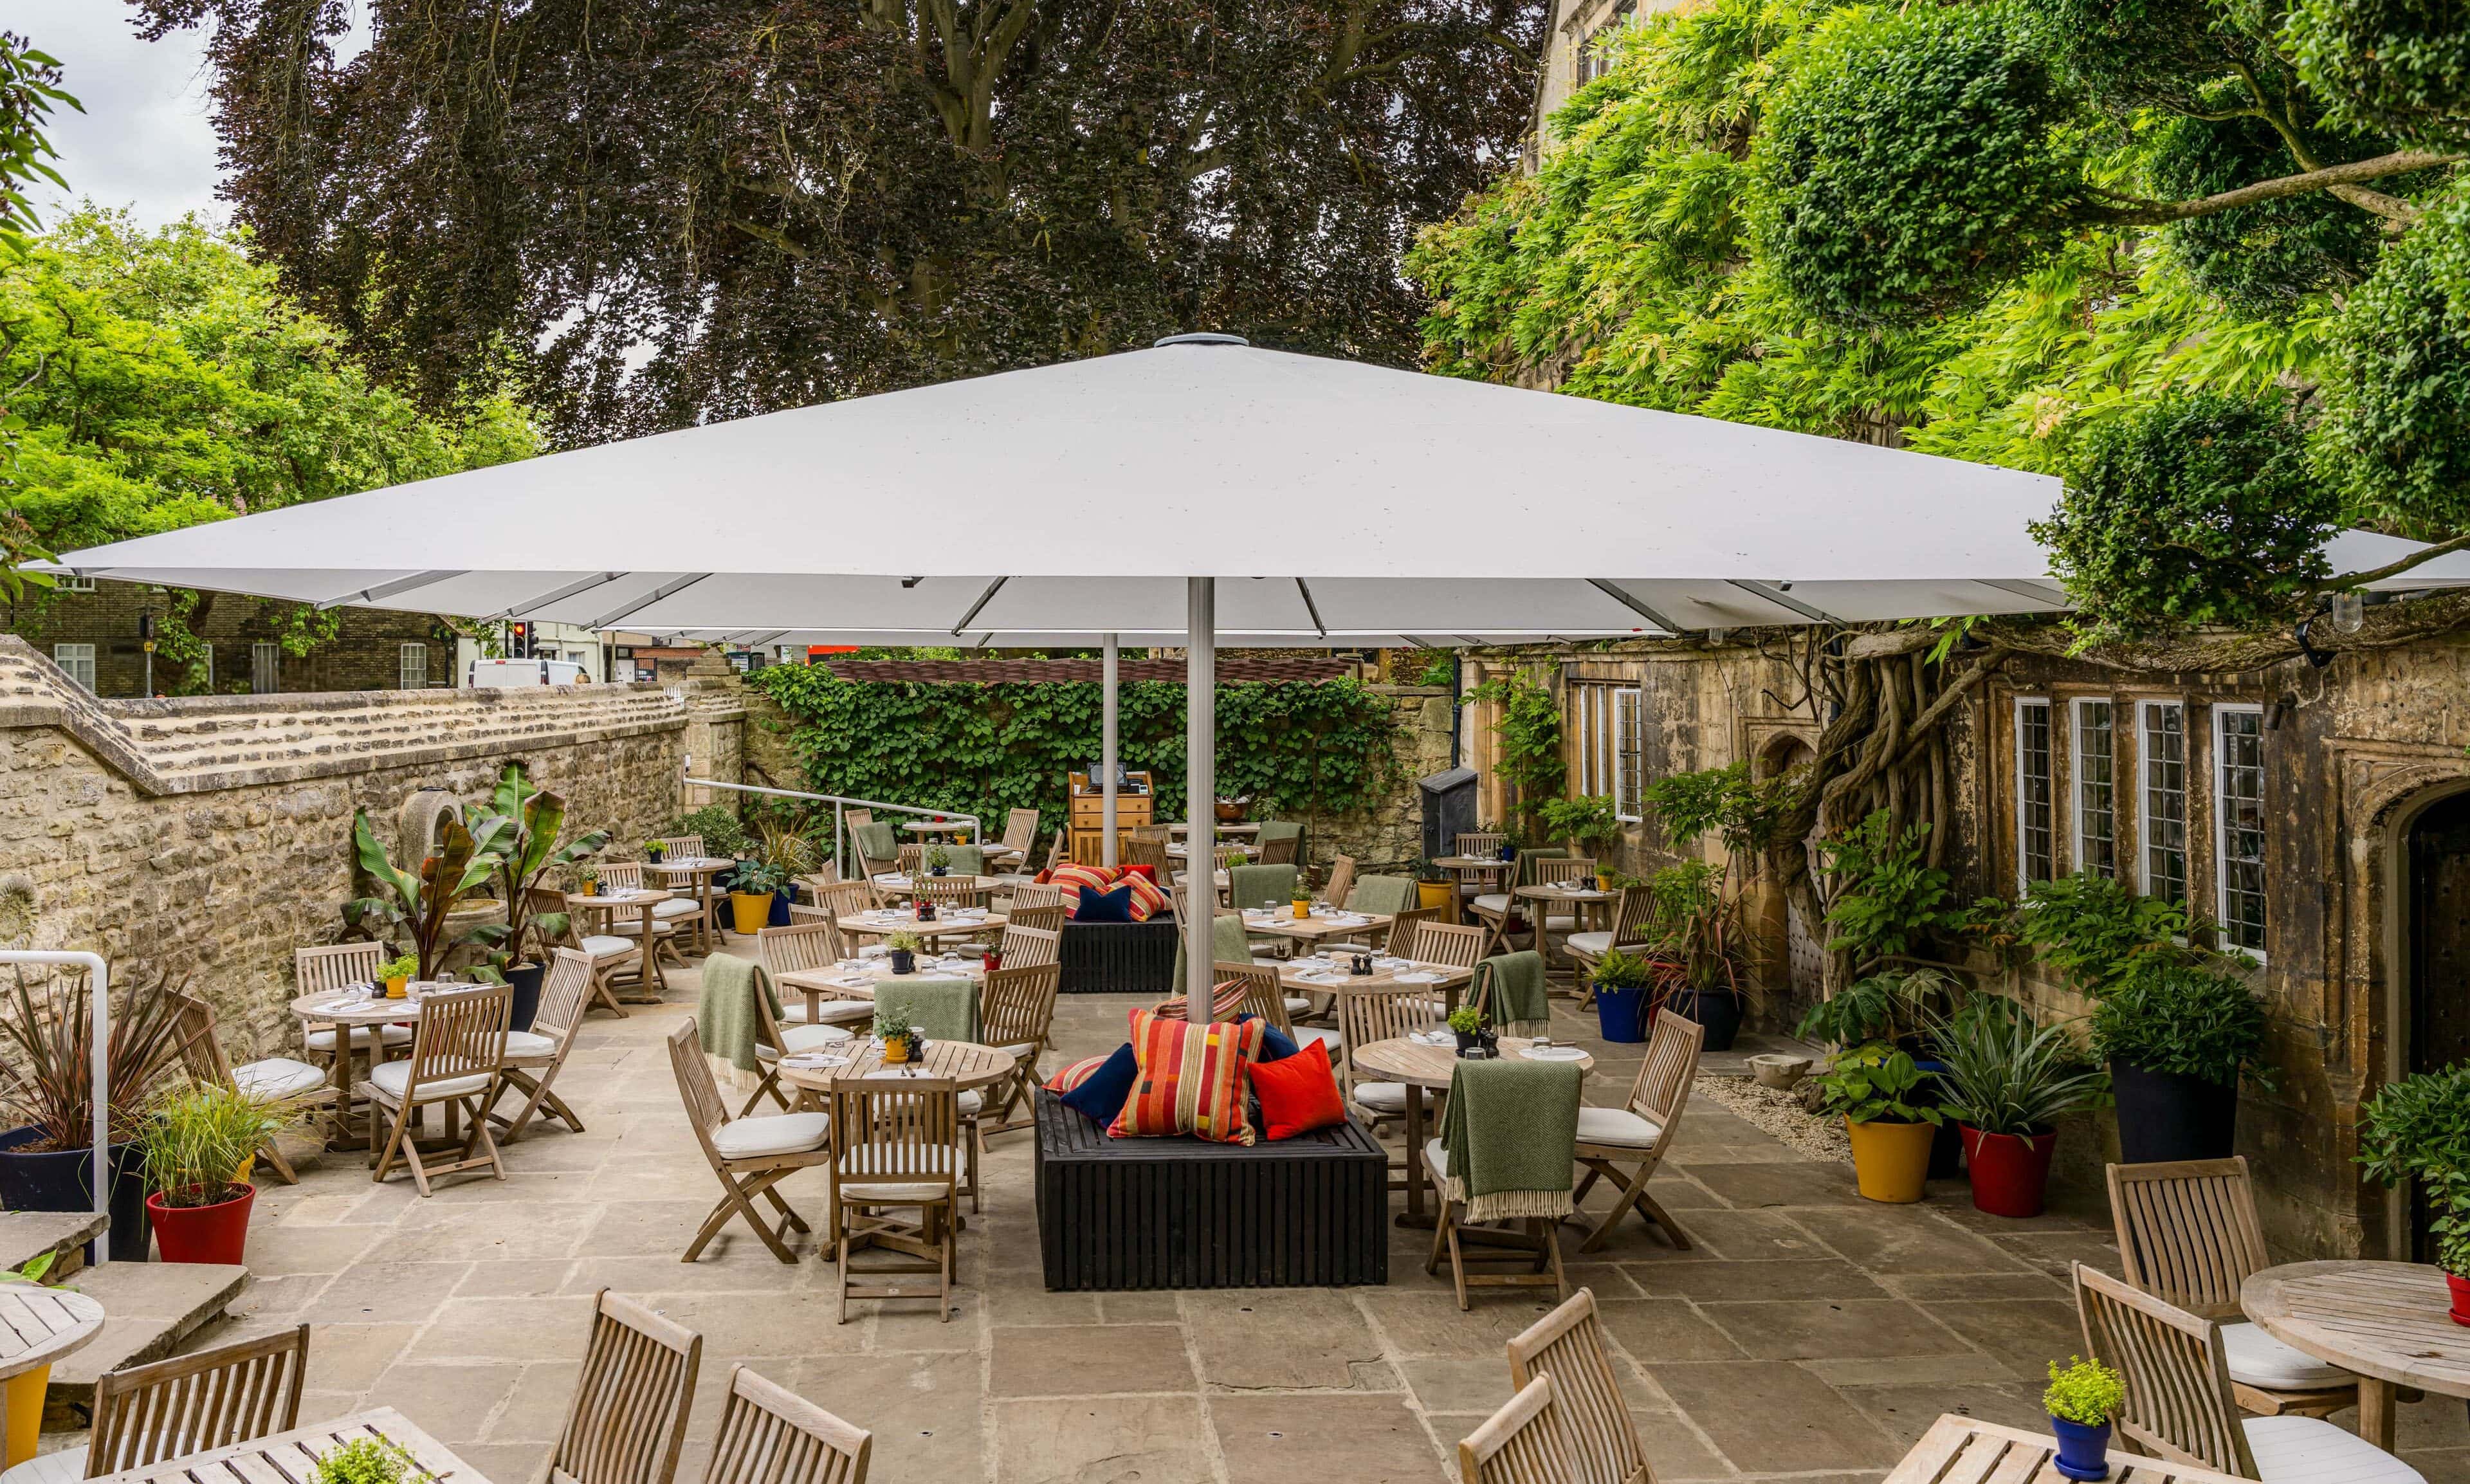 A7R03754-2024-Parsonage-Grill-Oxford-High-Res-Outdoor-Terrace-Seating-Web-Hero-1-aspect-ratio-3840-2307